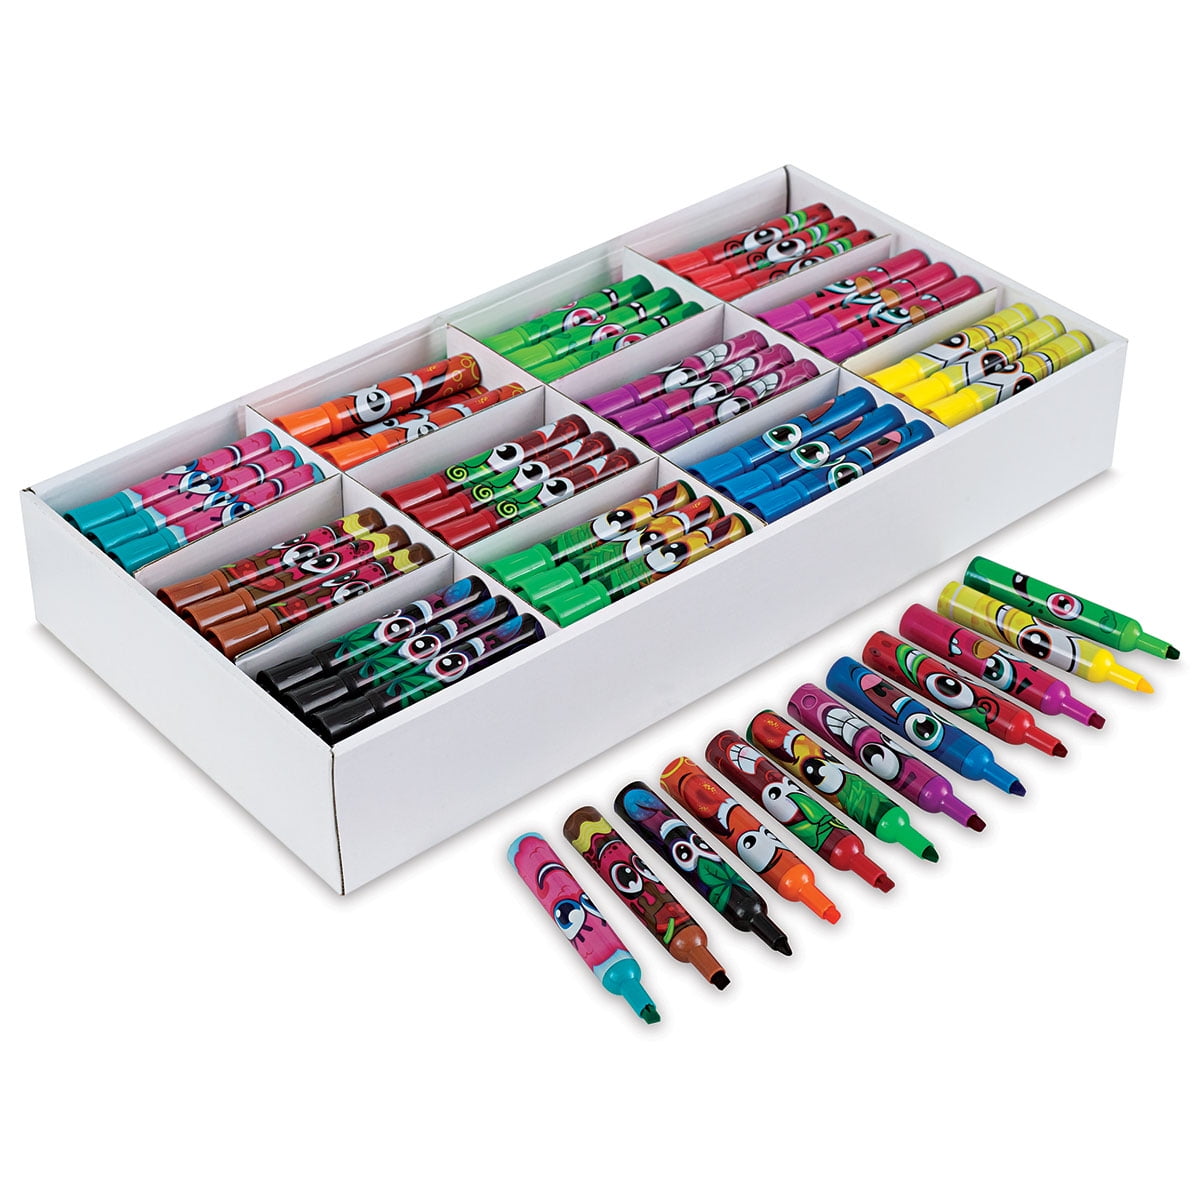 Scentos 10pk Candy Scented Fine Line Markers